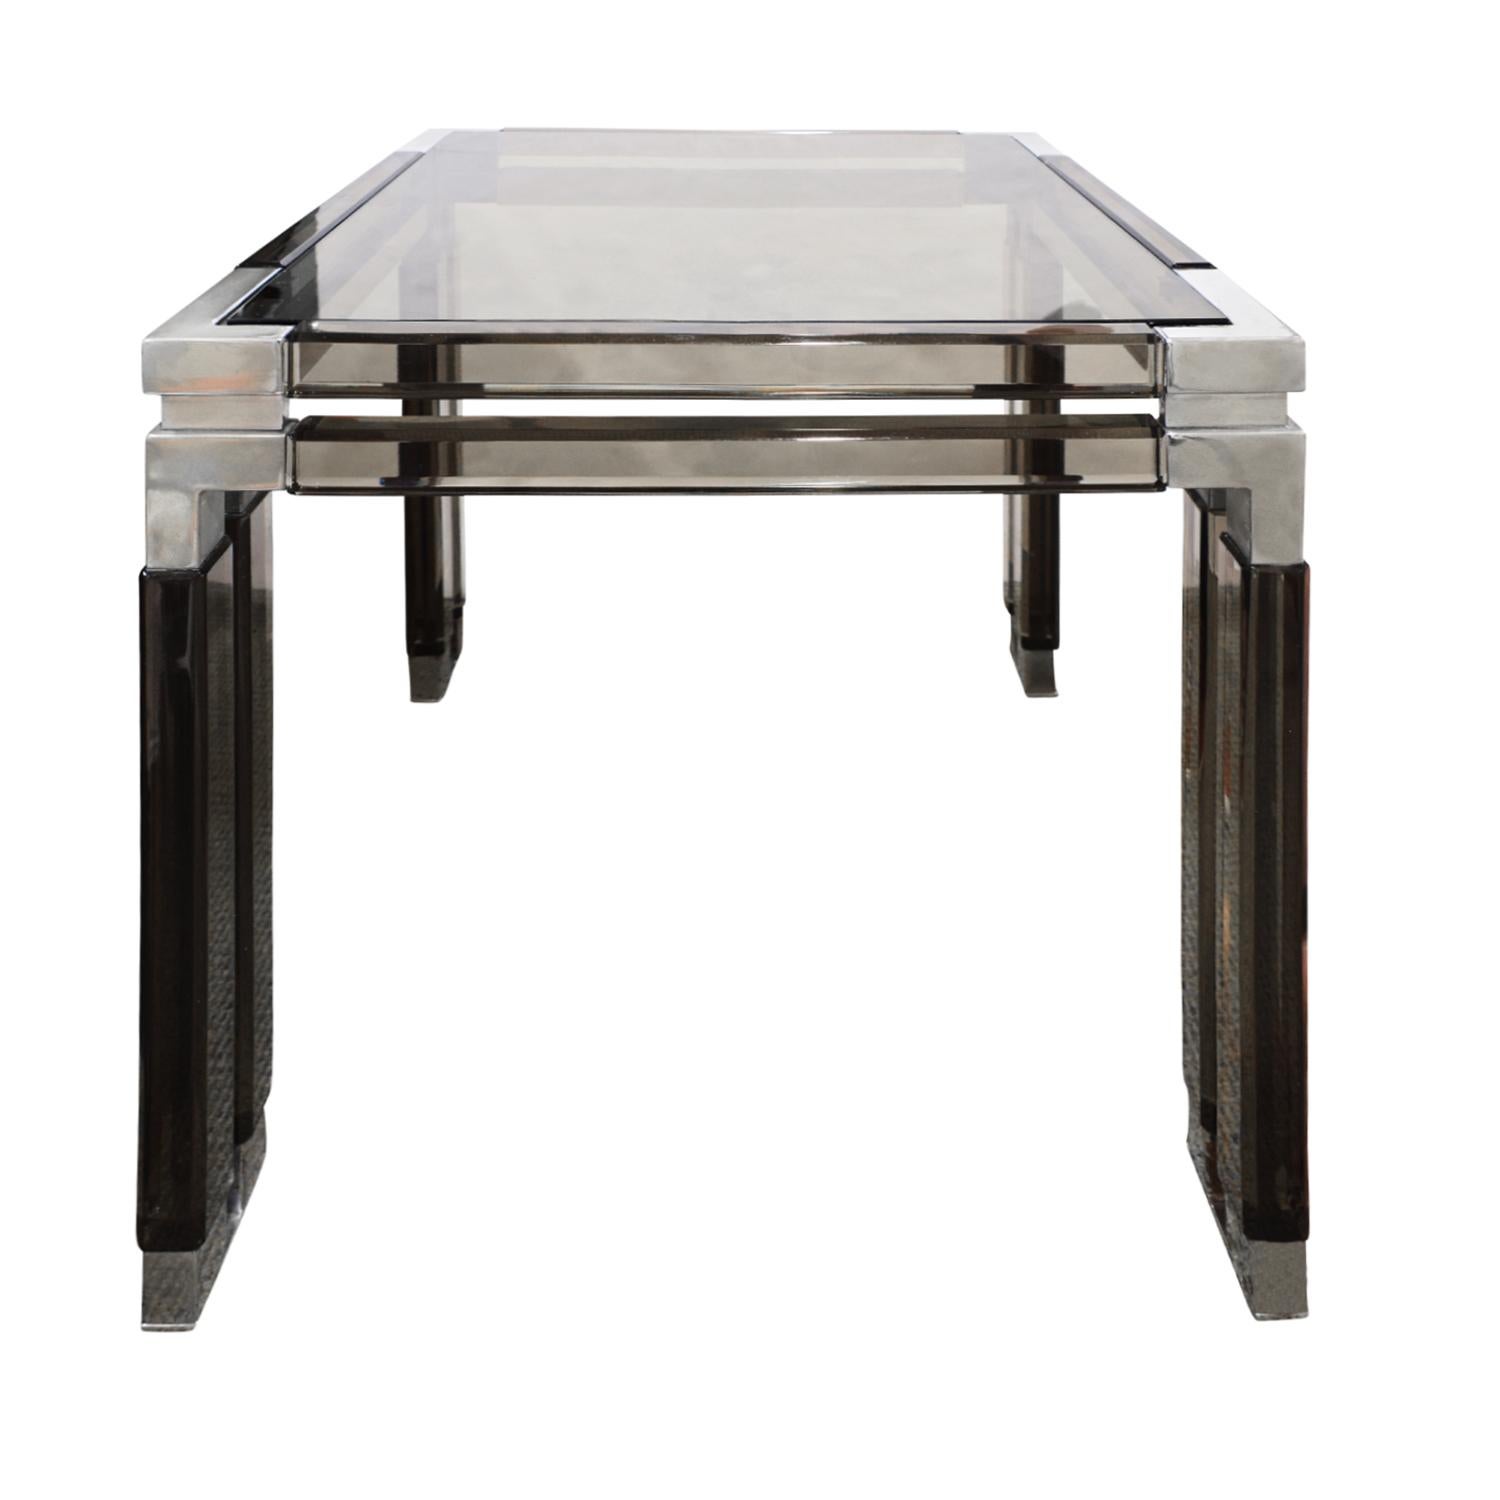 Incredible side table in smoke Lucite with polished chrome fittings and sabots by Hudson Rissman for Paul Laszlo, American 1983. Comes with original invoice to Paul Laszlo stating it was a custom order and also includes a hand-written note by Paul